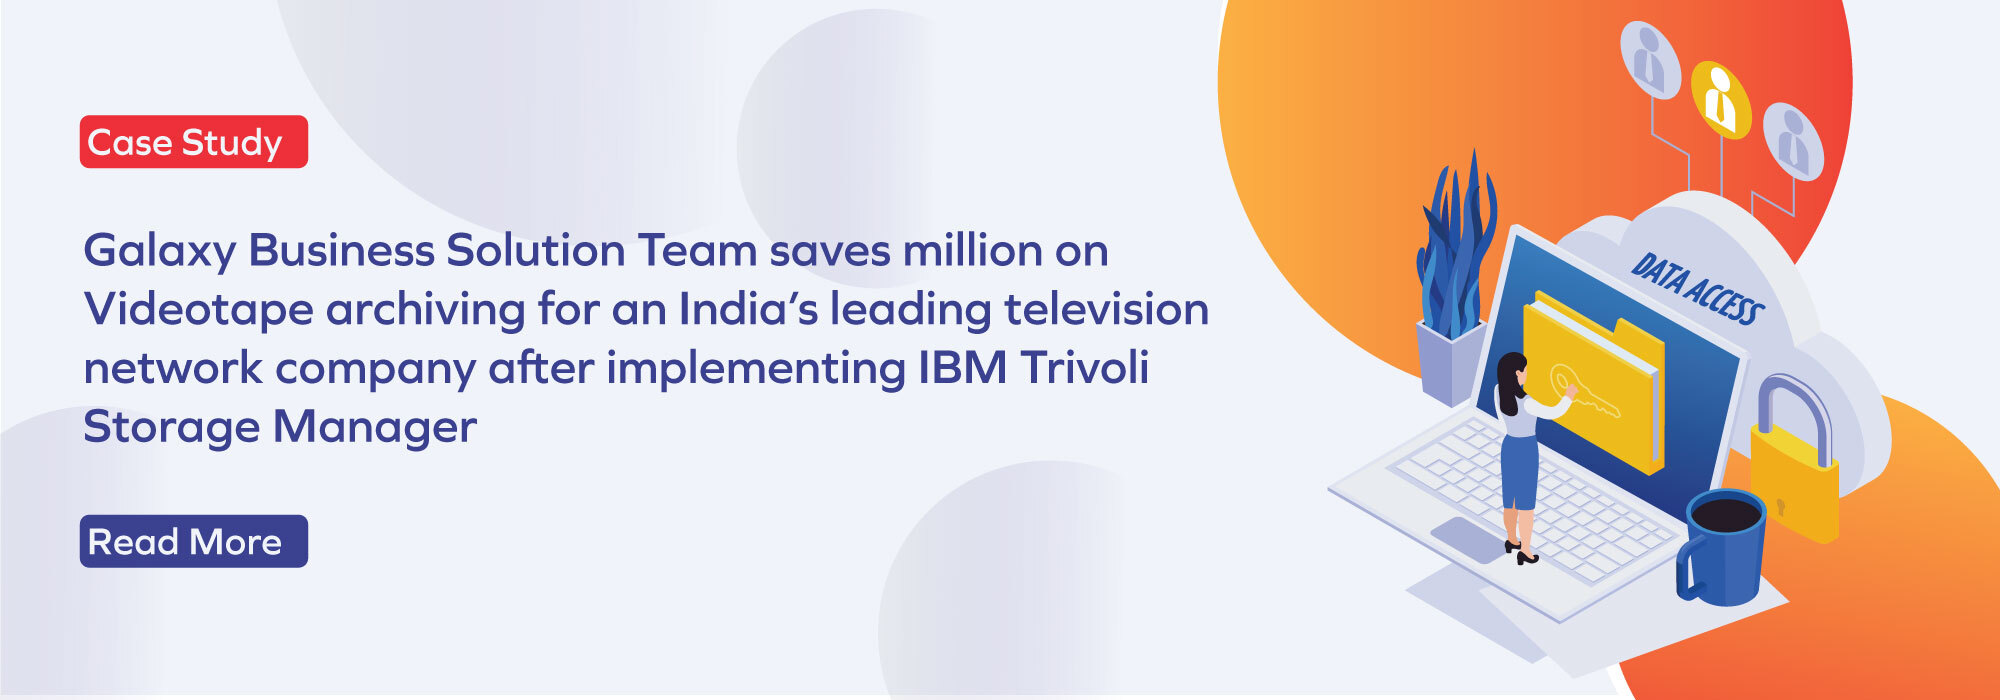 A leading television network company saved millions on videotape archiving by implementing IBM Trivoli Storage Manager